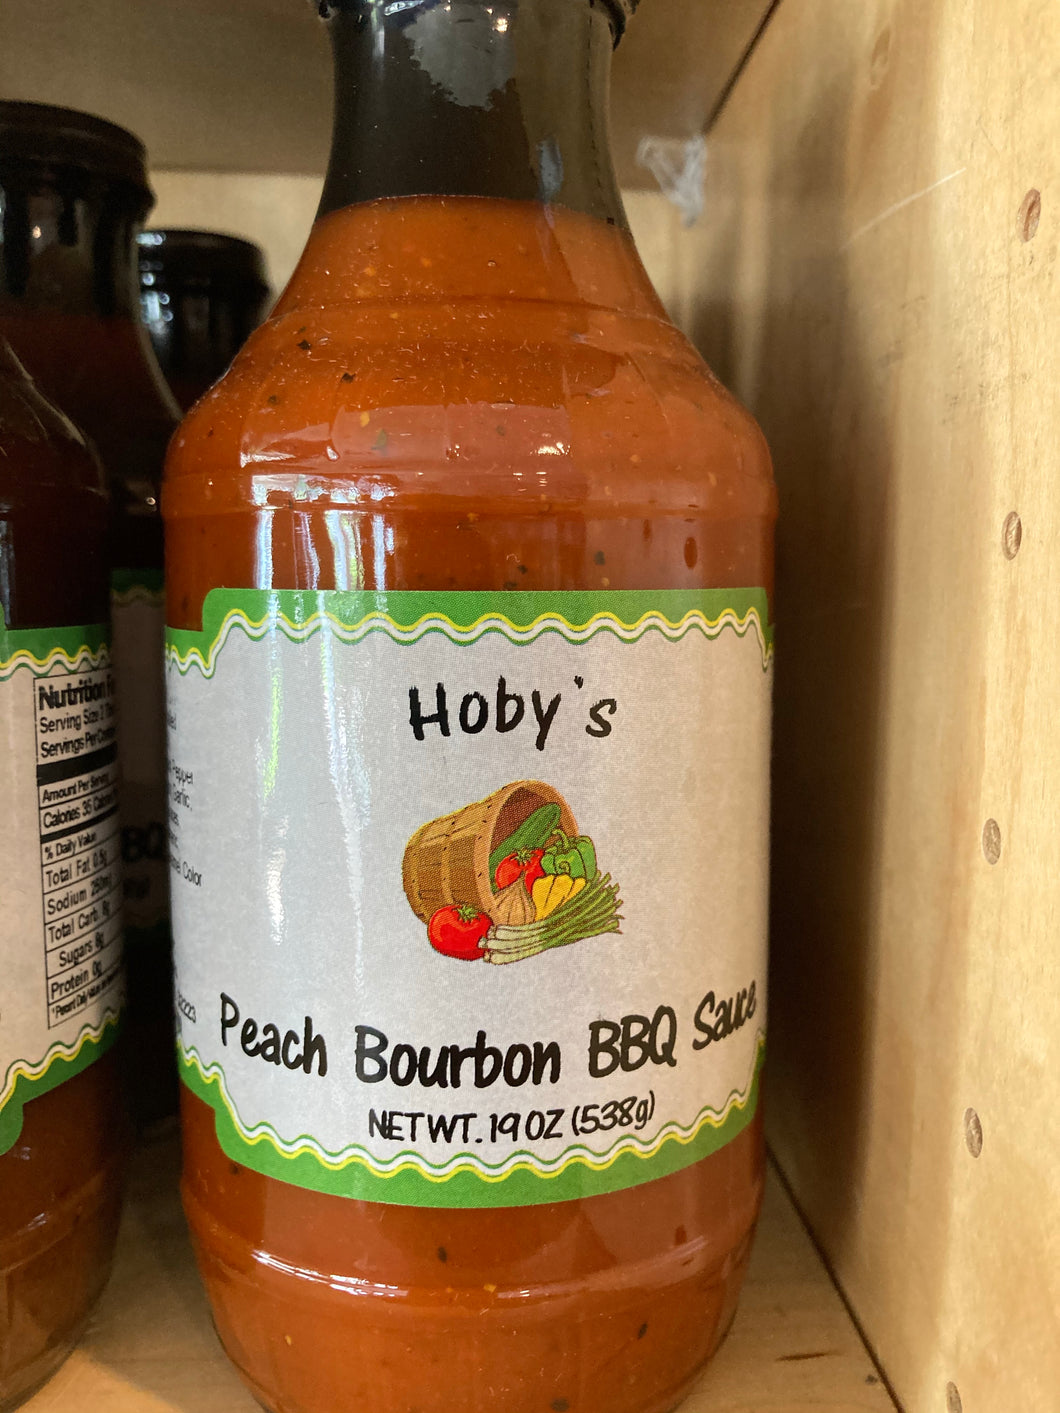 Peach Bourbon BBQ Sauce from Hoby’s